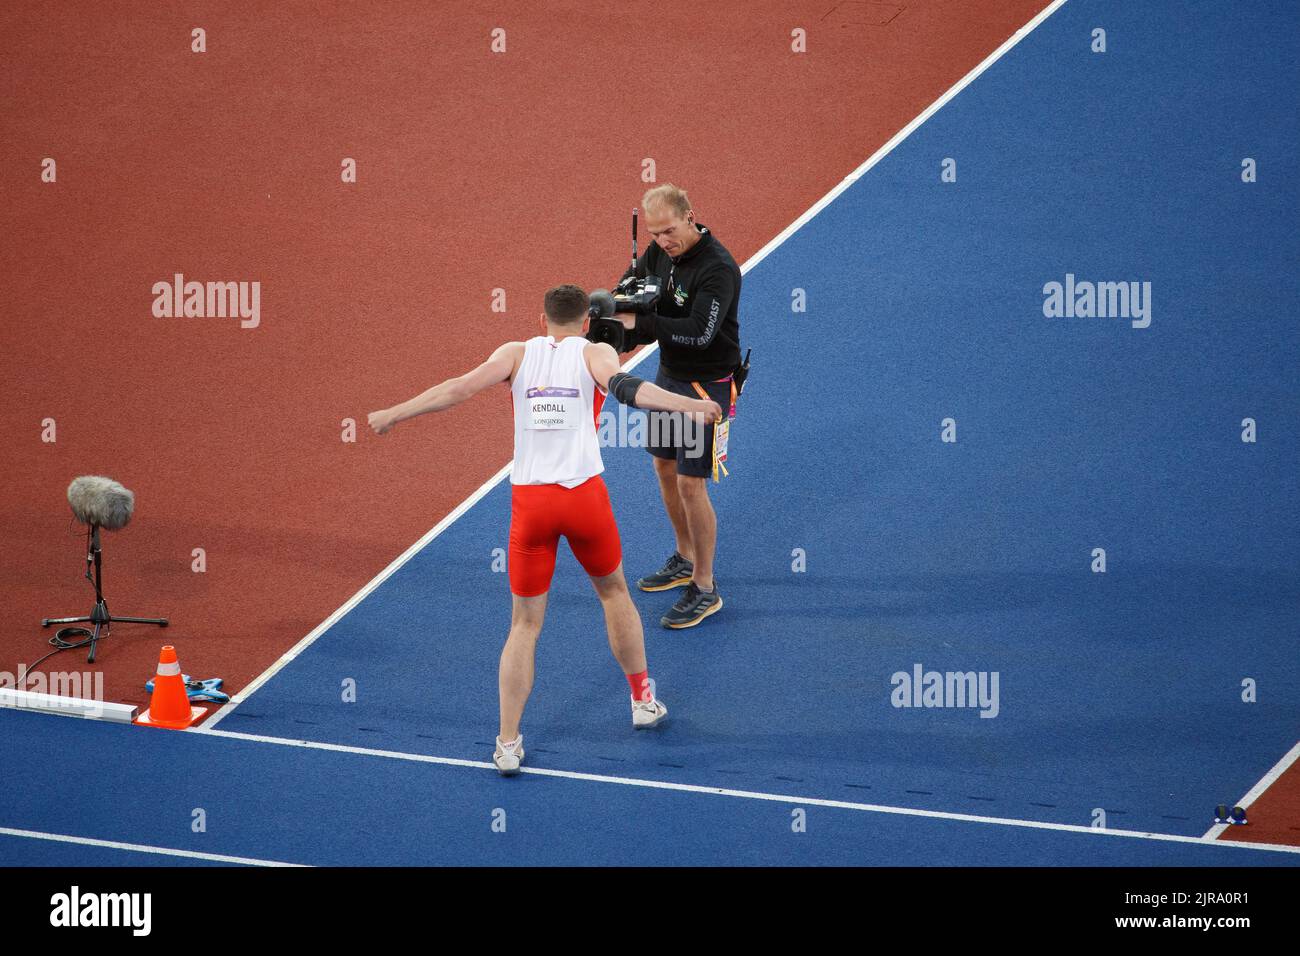 Action from the Birmingham Commonwealth Games at Alexander sports stadium on the evening of 5th August 2022. Picture shows Harry Kendall of England taking part in the Javelin throw in the mens decathlon. Stock Photo